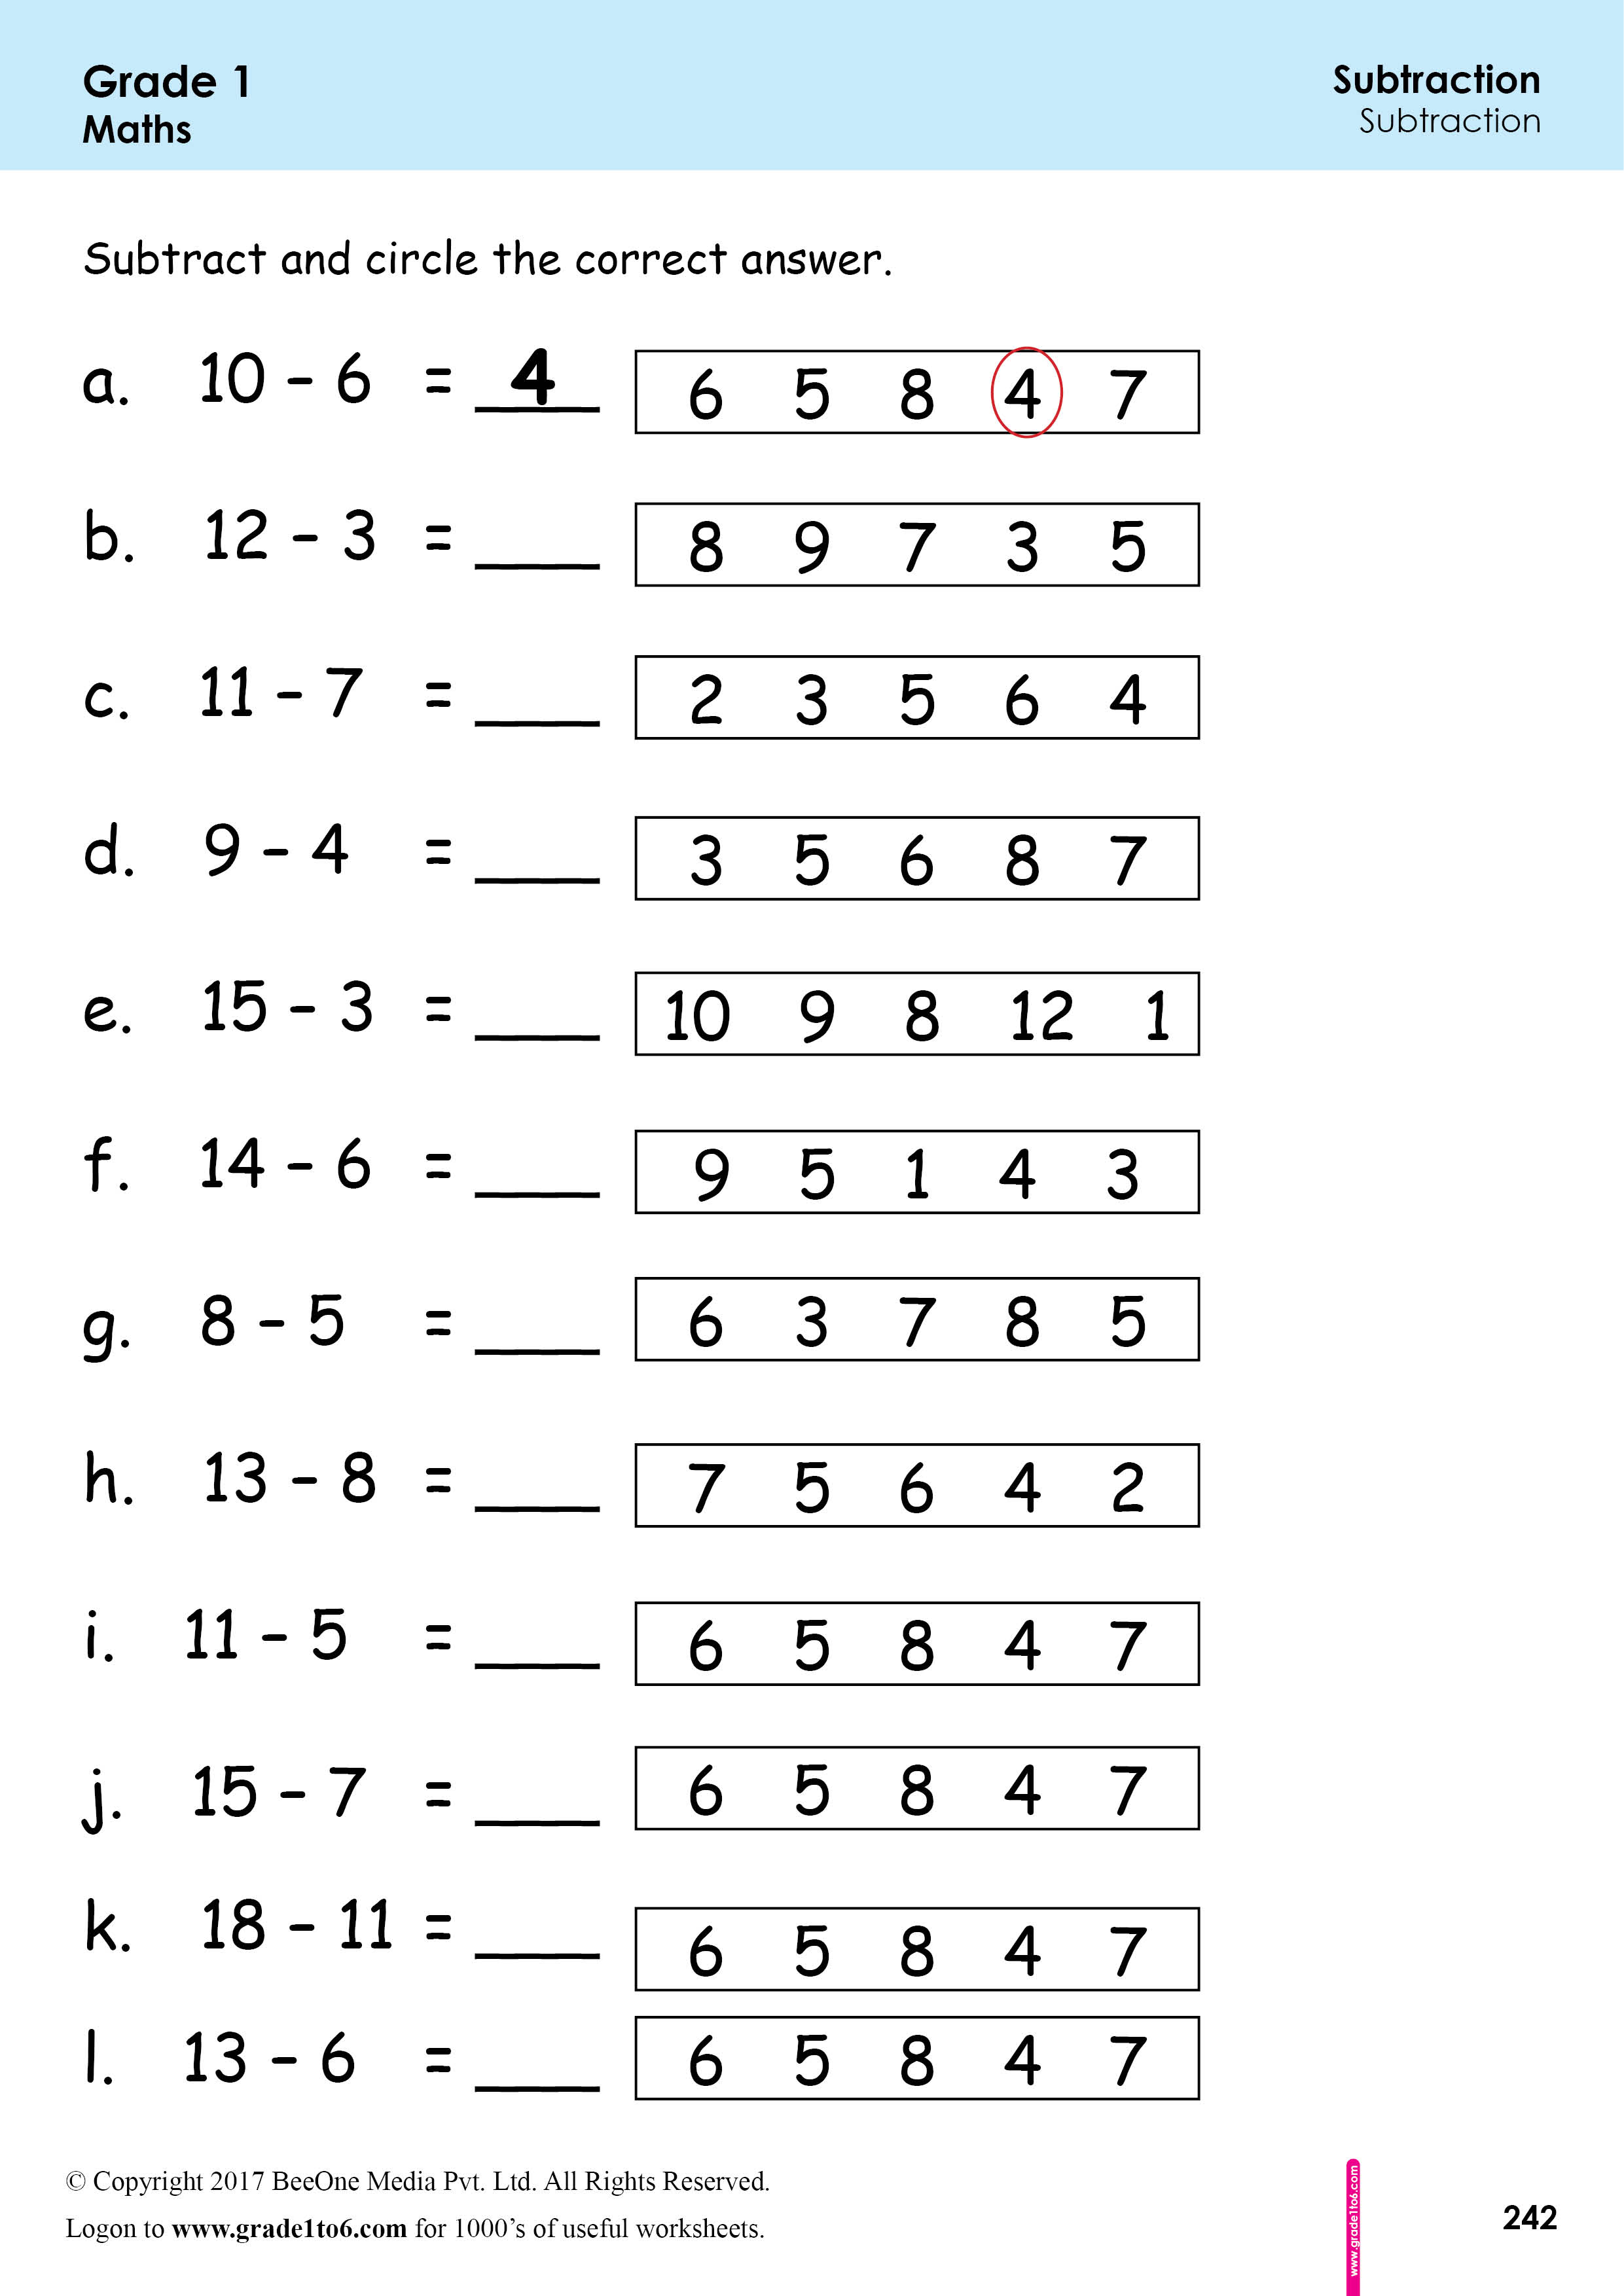 First Grade Subtraction Worksheets|www.grade1to6.com